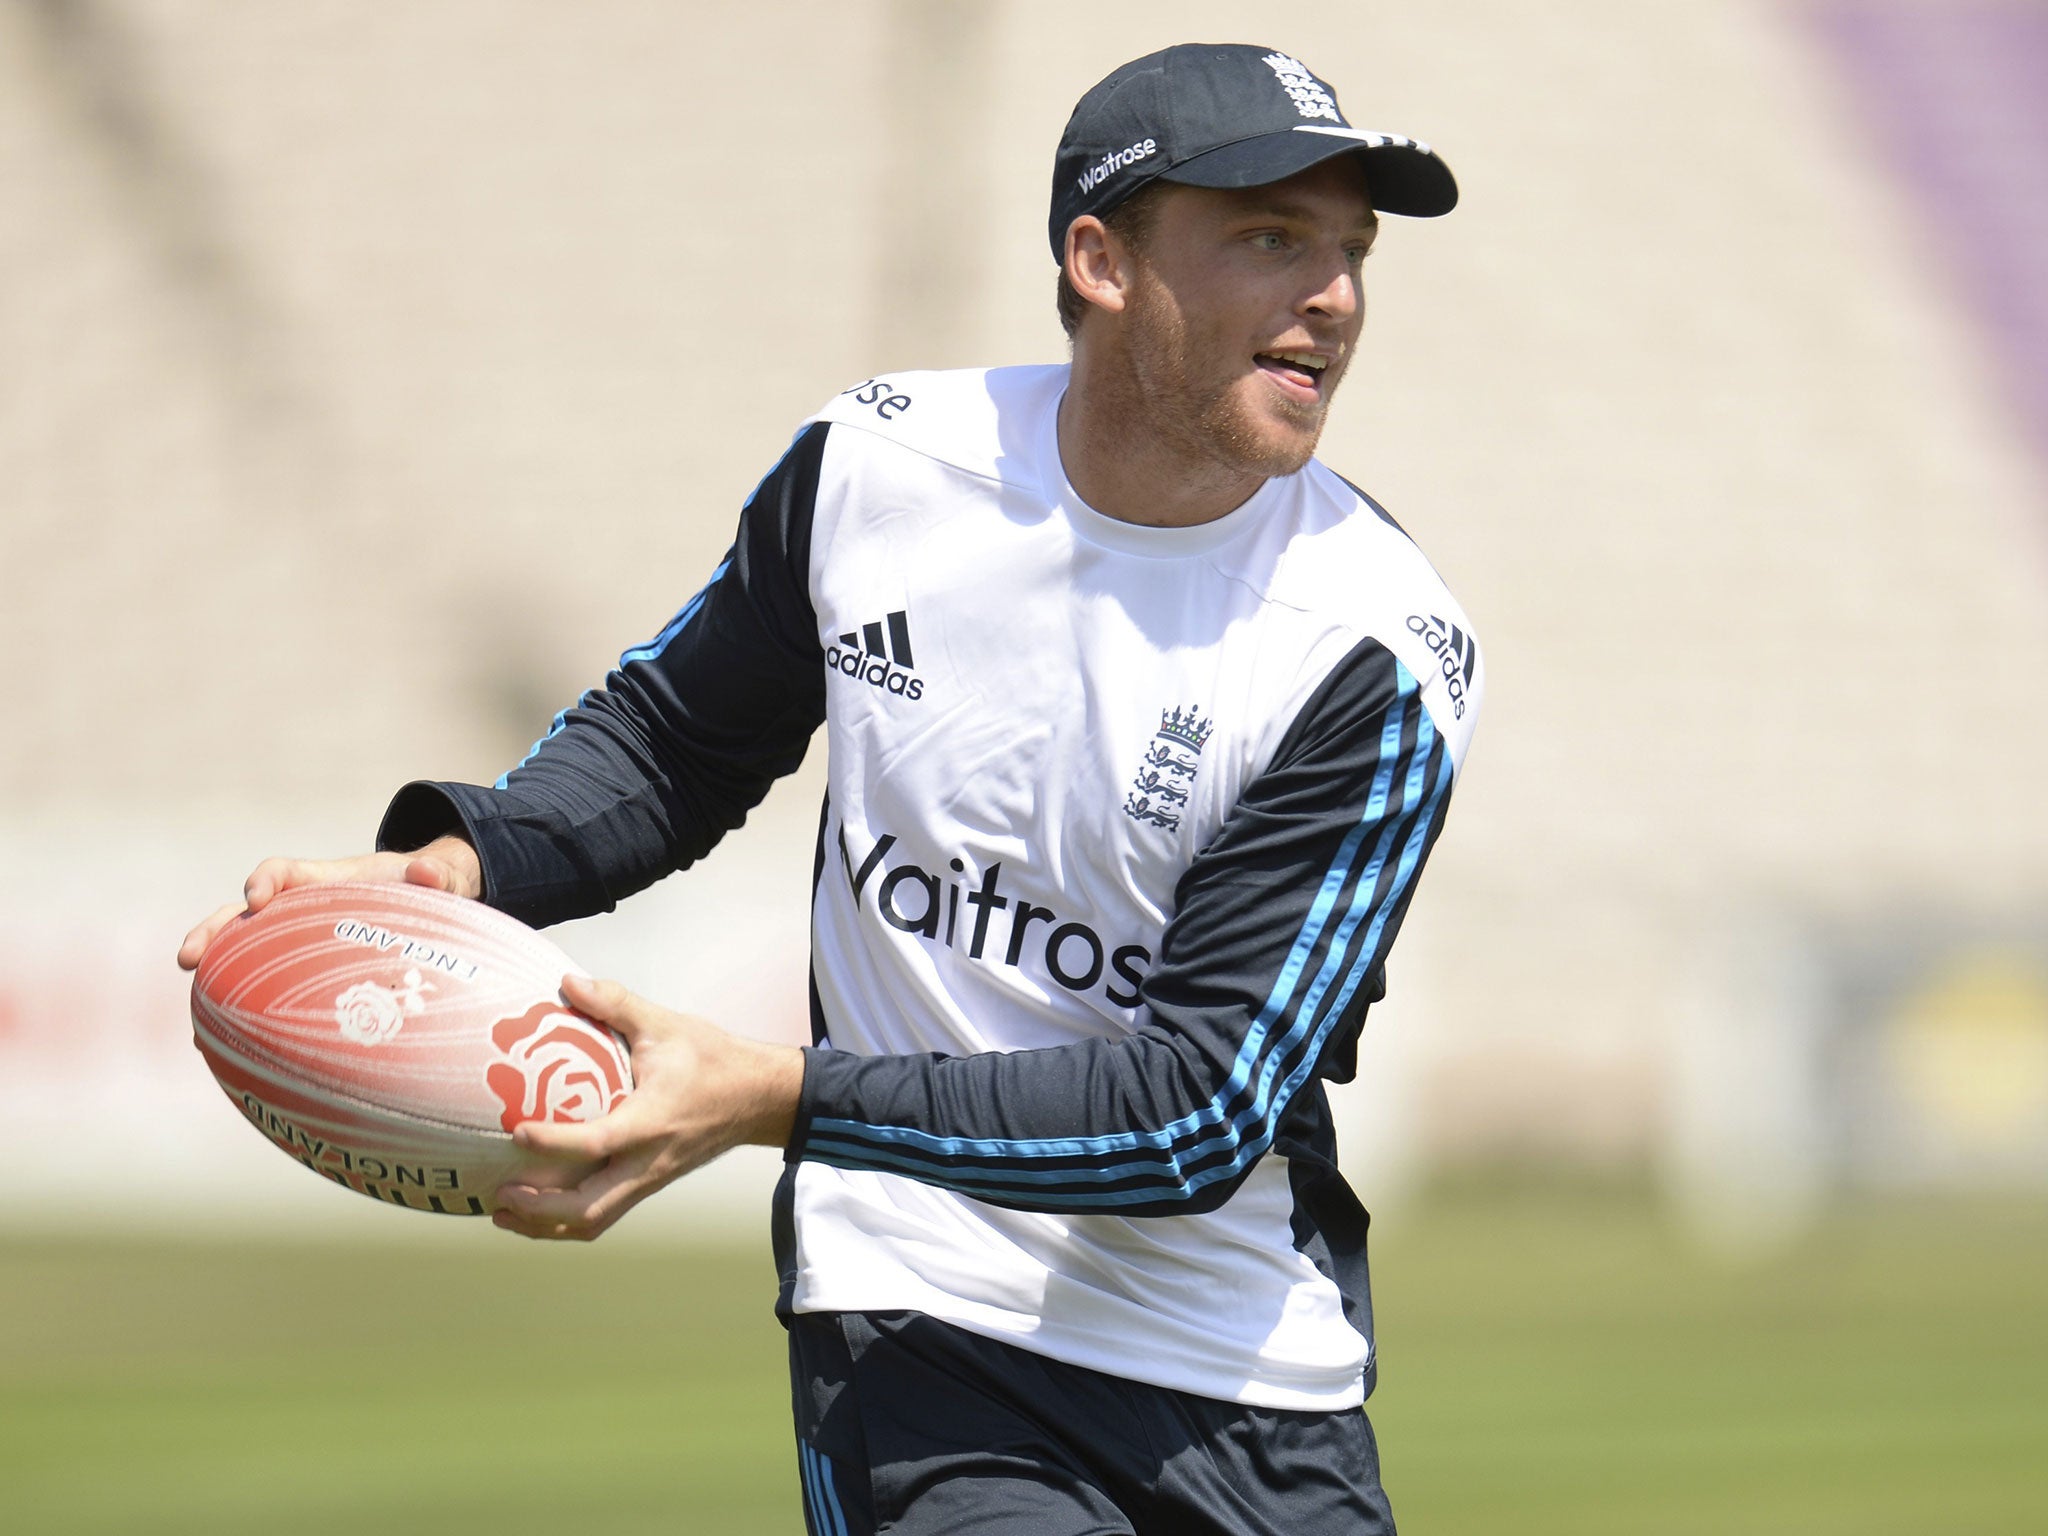 Jos Buttler plays rugby during the England cricket team’s
training